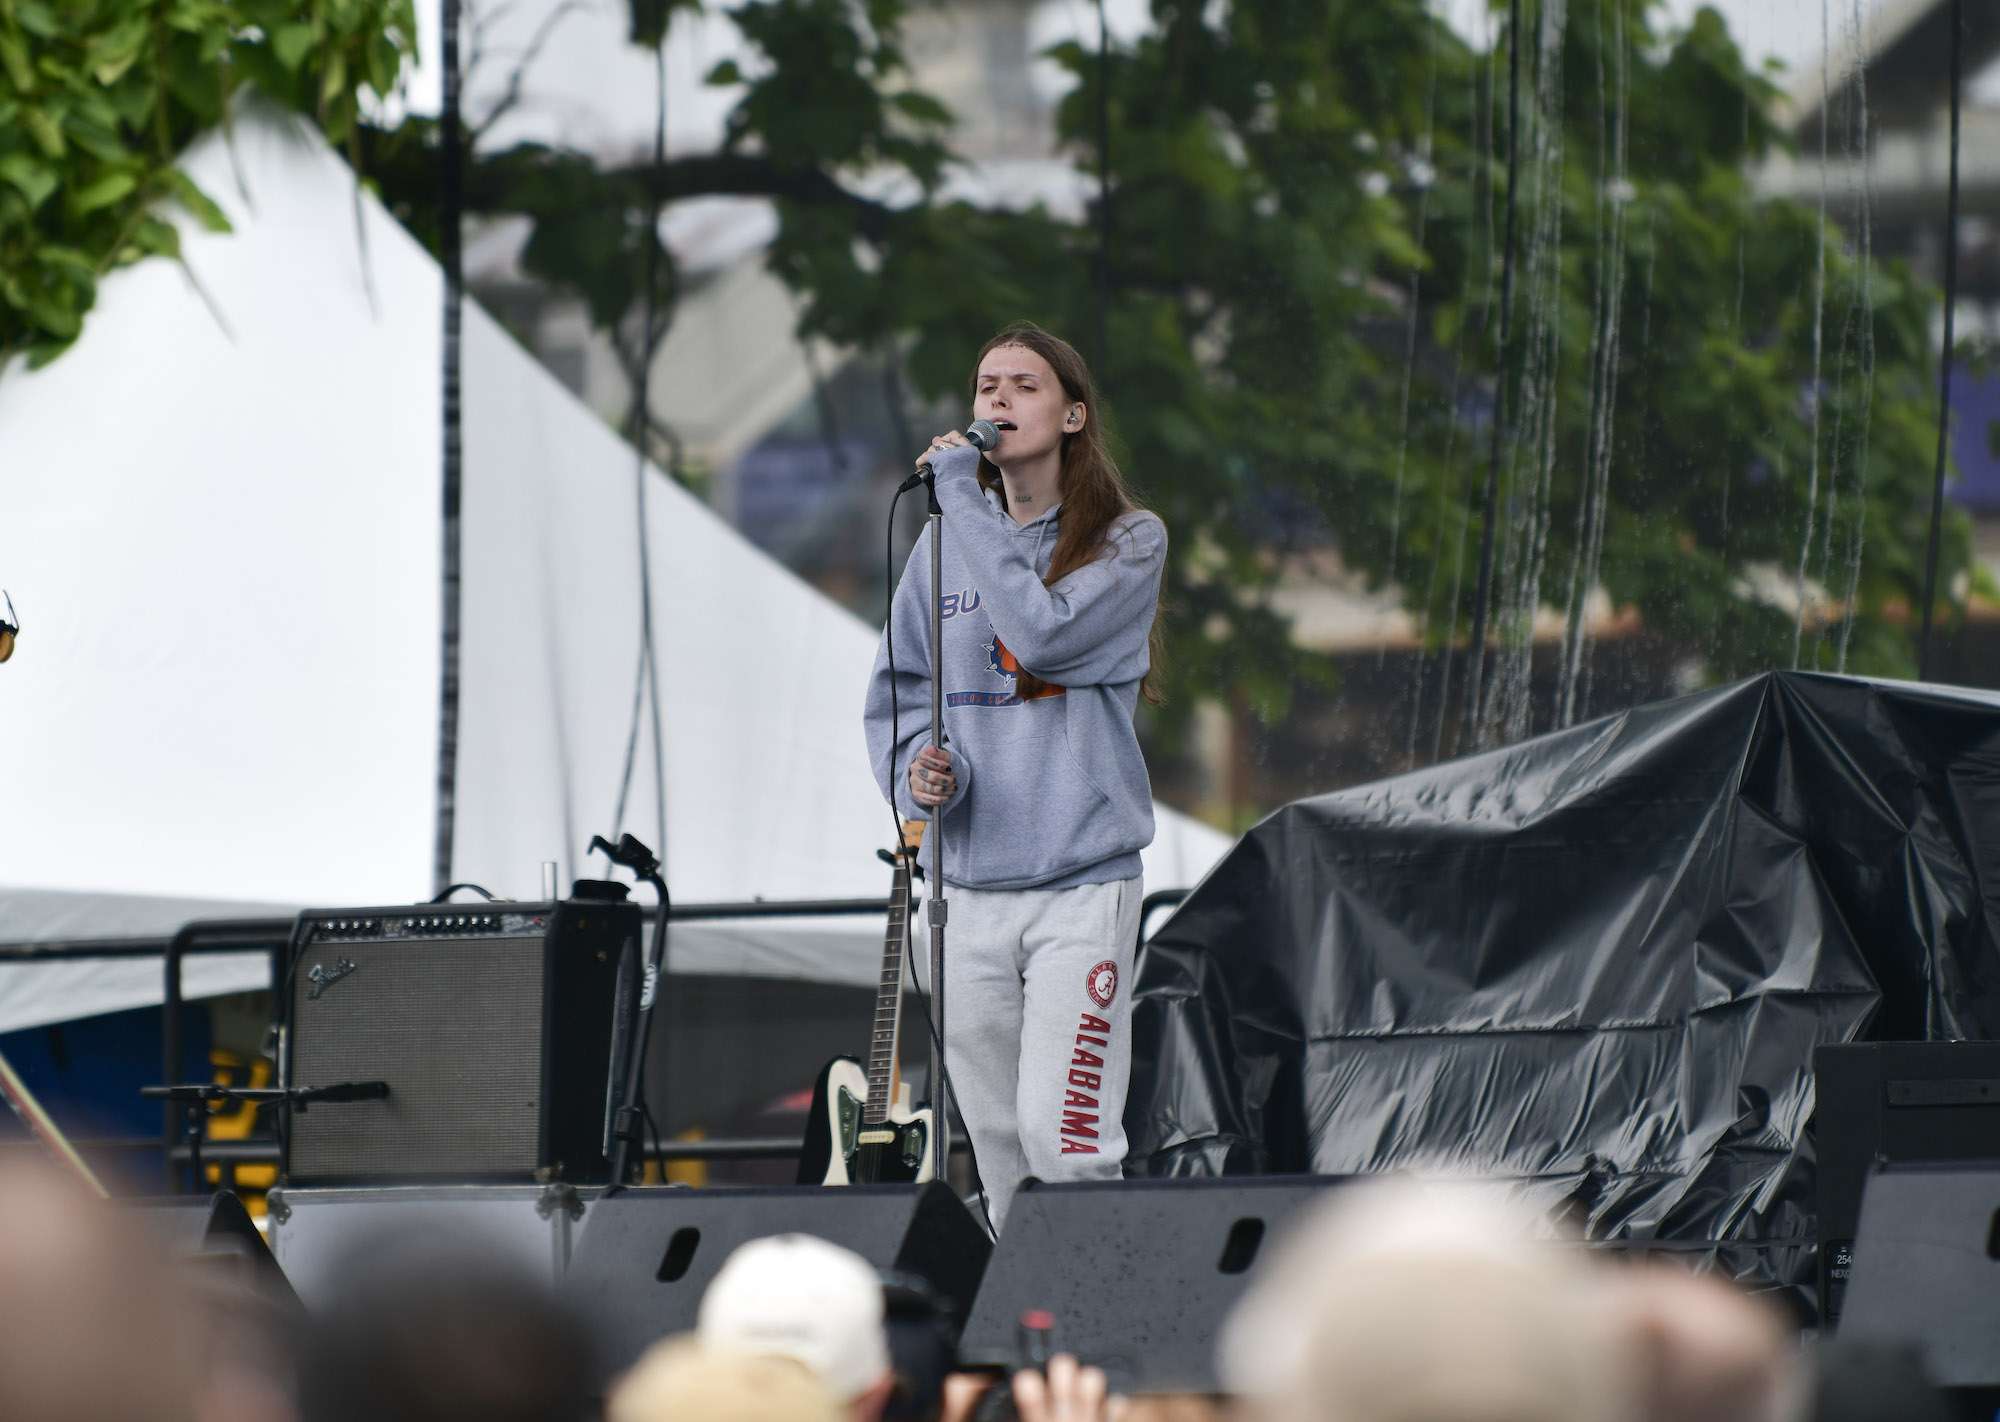 Ethel Cain Live At Pitchfork [GALLERY] 6